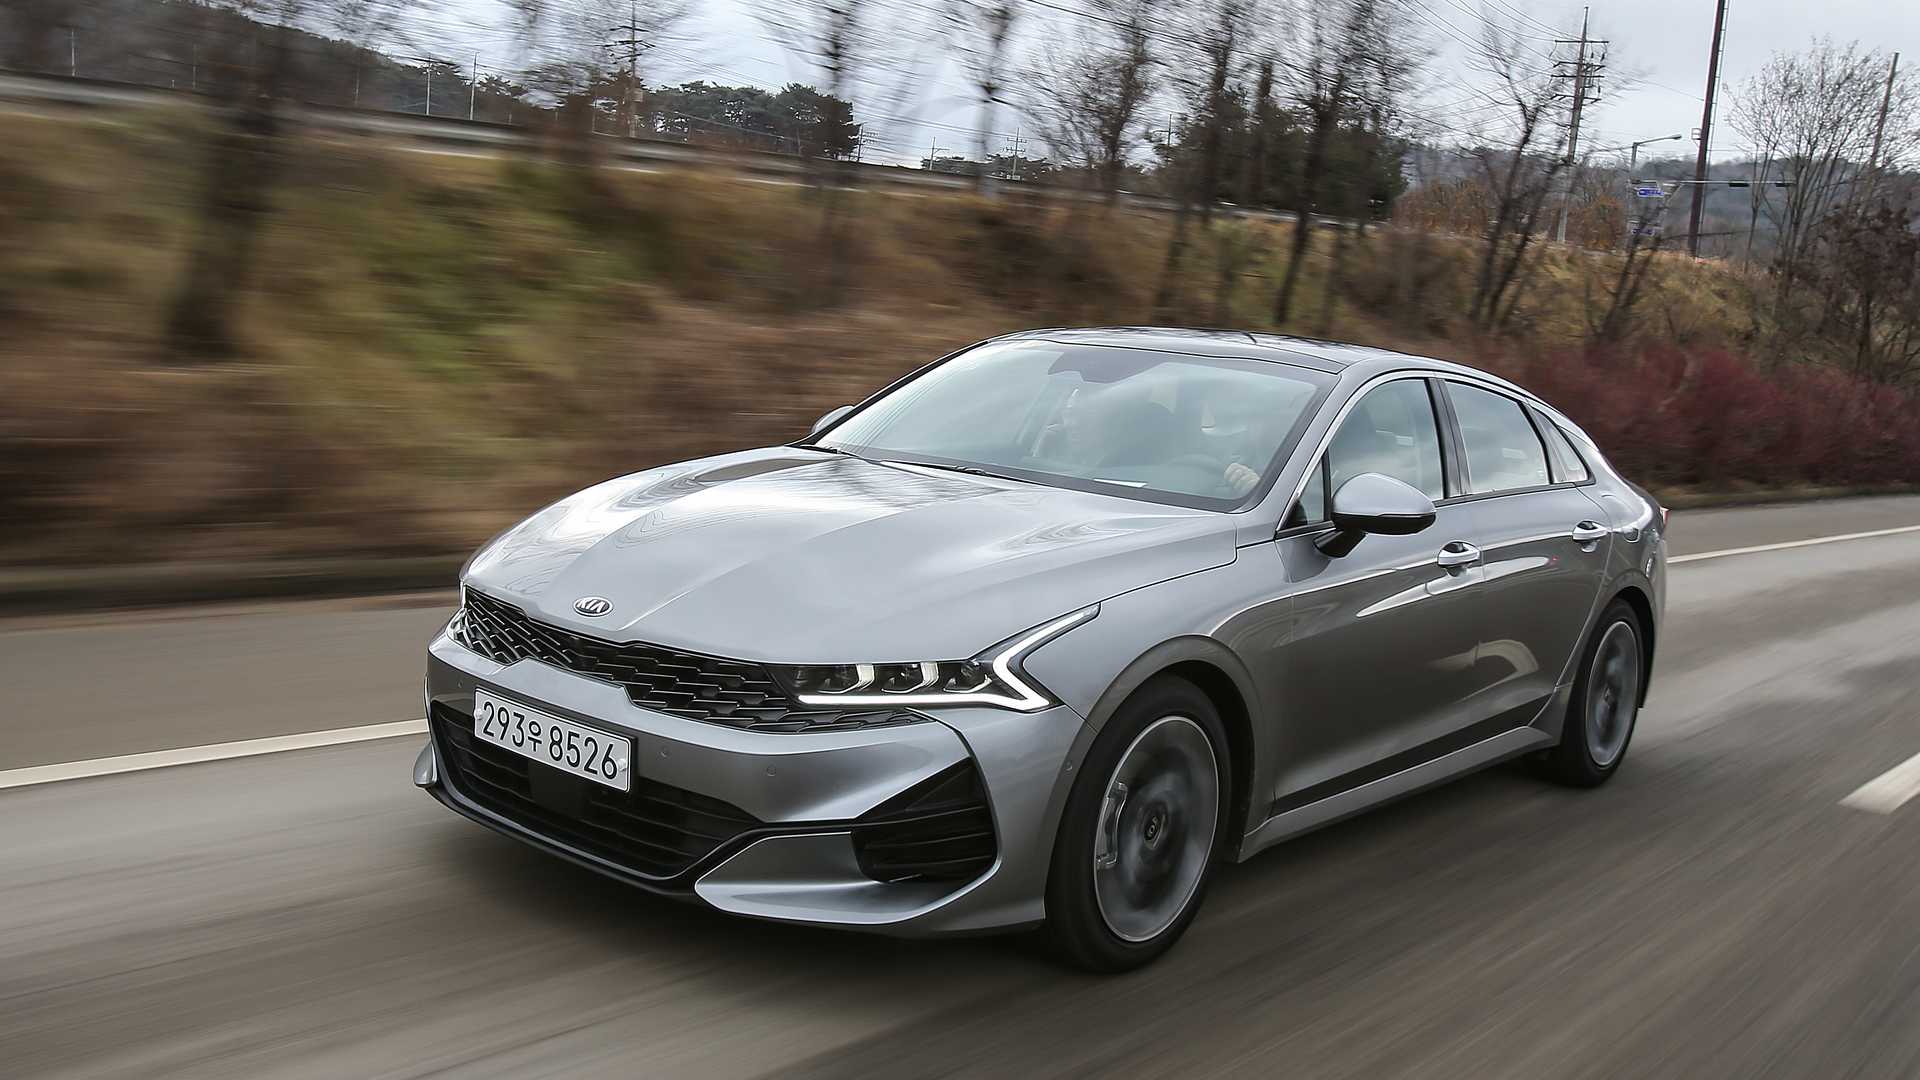 Kia K5 recently renamed Optima has been relaunched with a stunning design, beautiful interiors, latest technology, and all-new powertrain option.